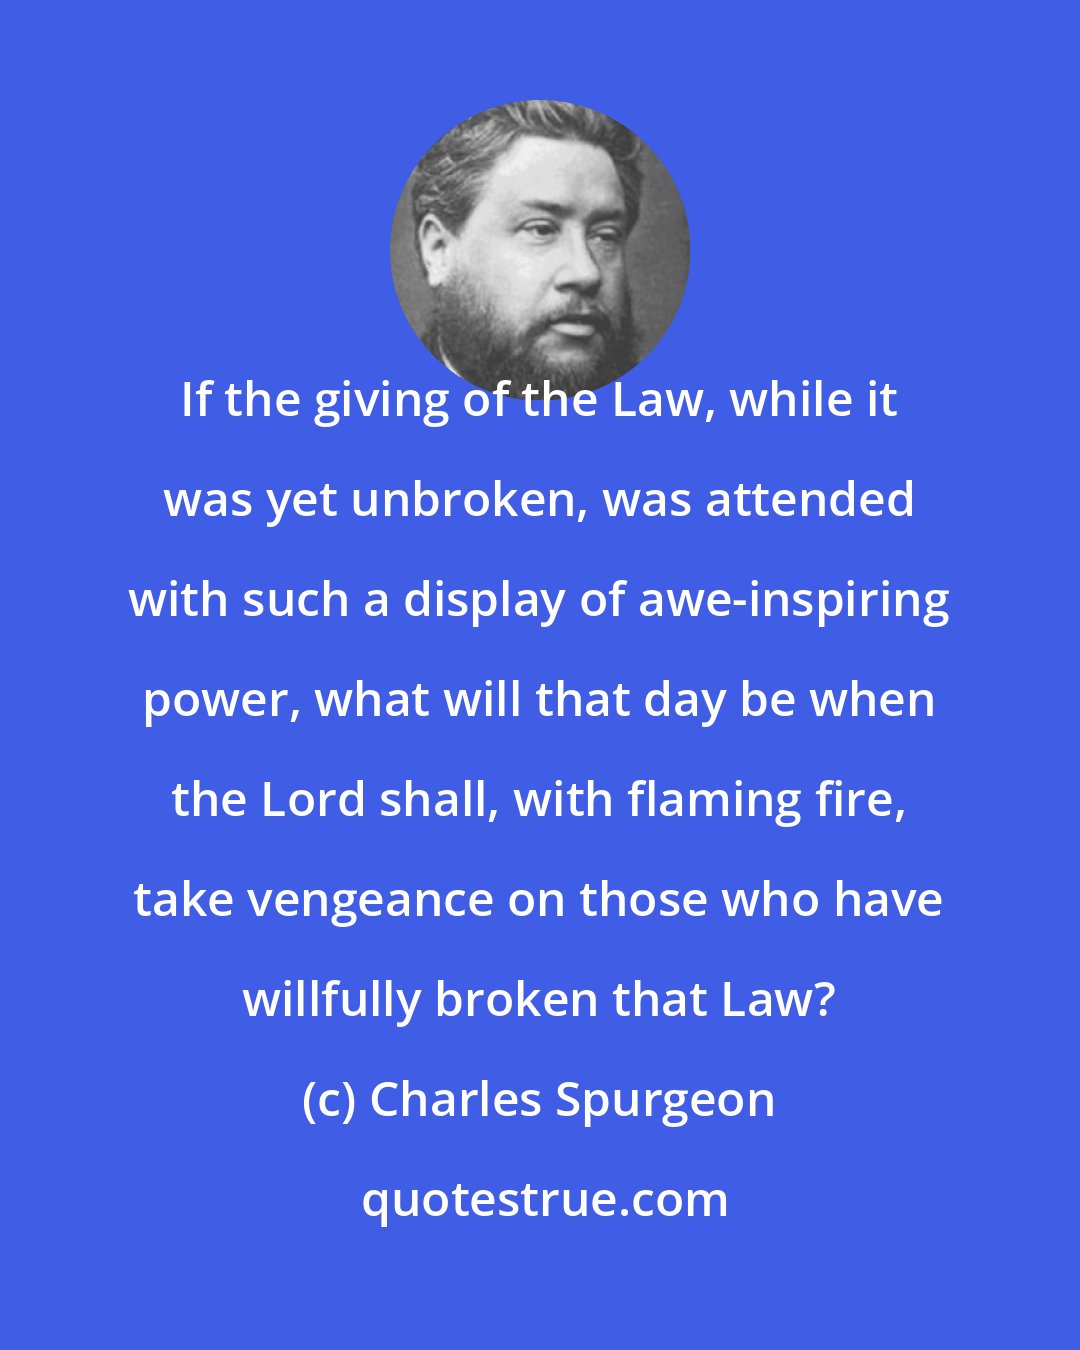 Charles Spurgeon: If the giving of the Law, while it was yet unbroken, was attended with such a display of awe-inspiring power, what will that day be when the Lord shall, with flaming fire, take vengeance on those who have willfully broken that Law?